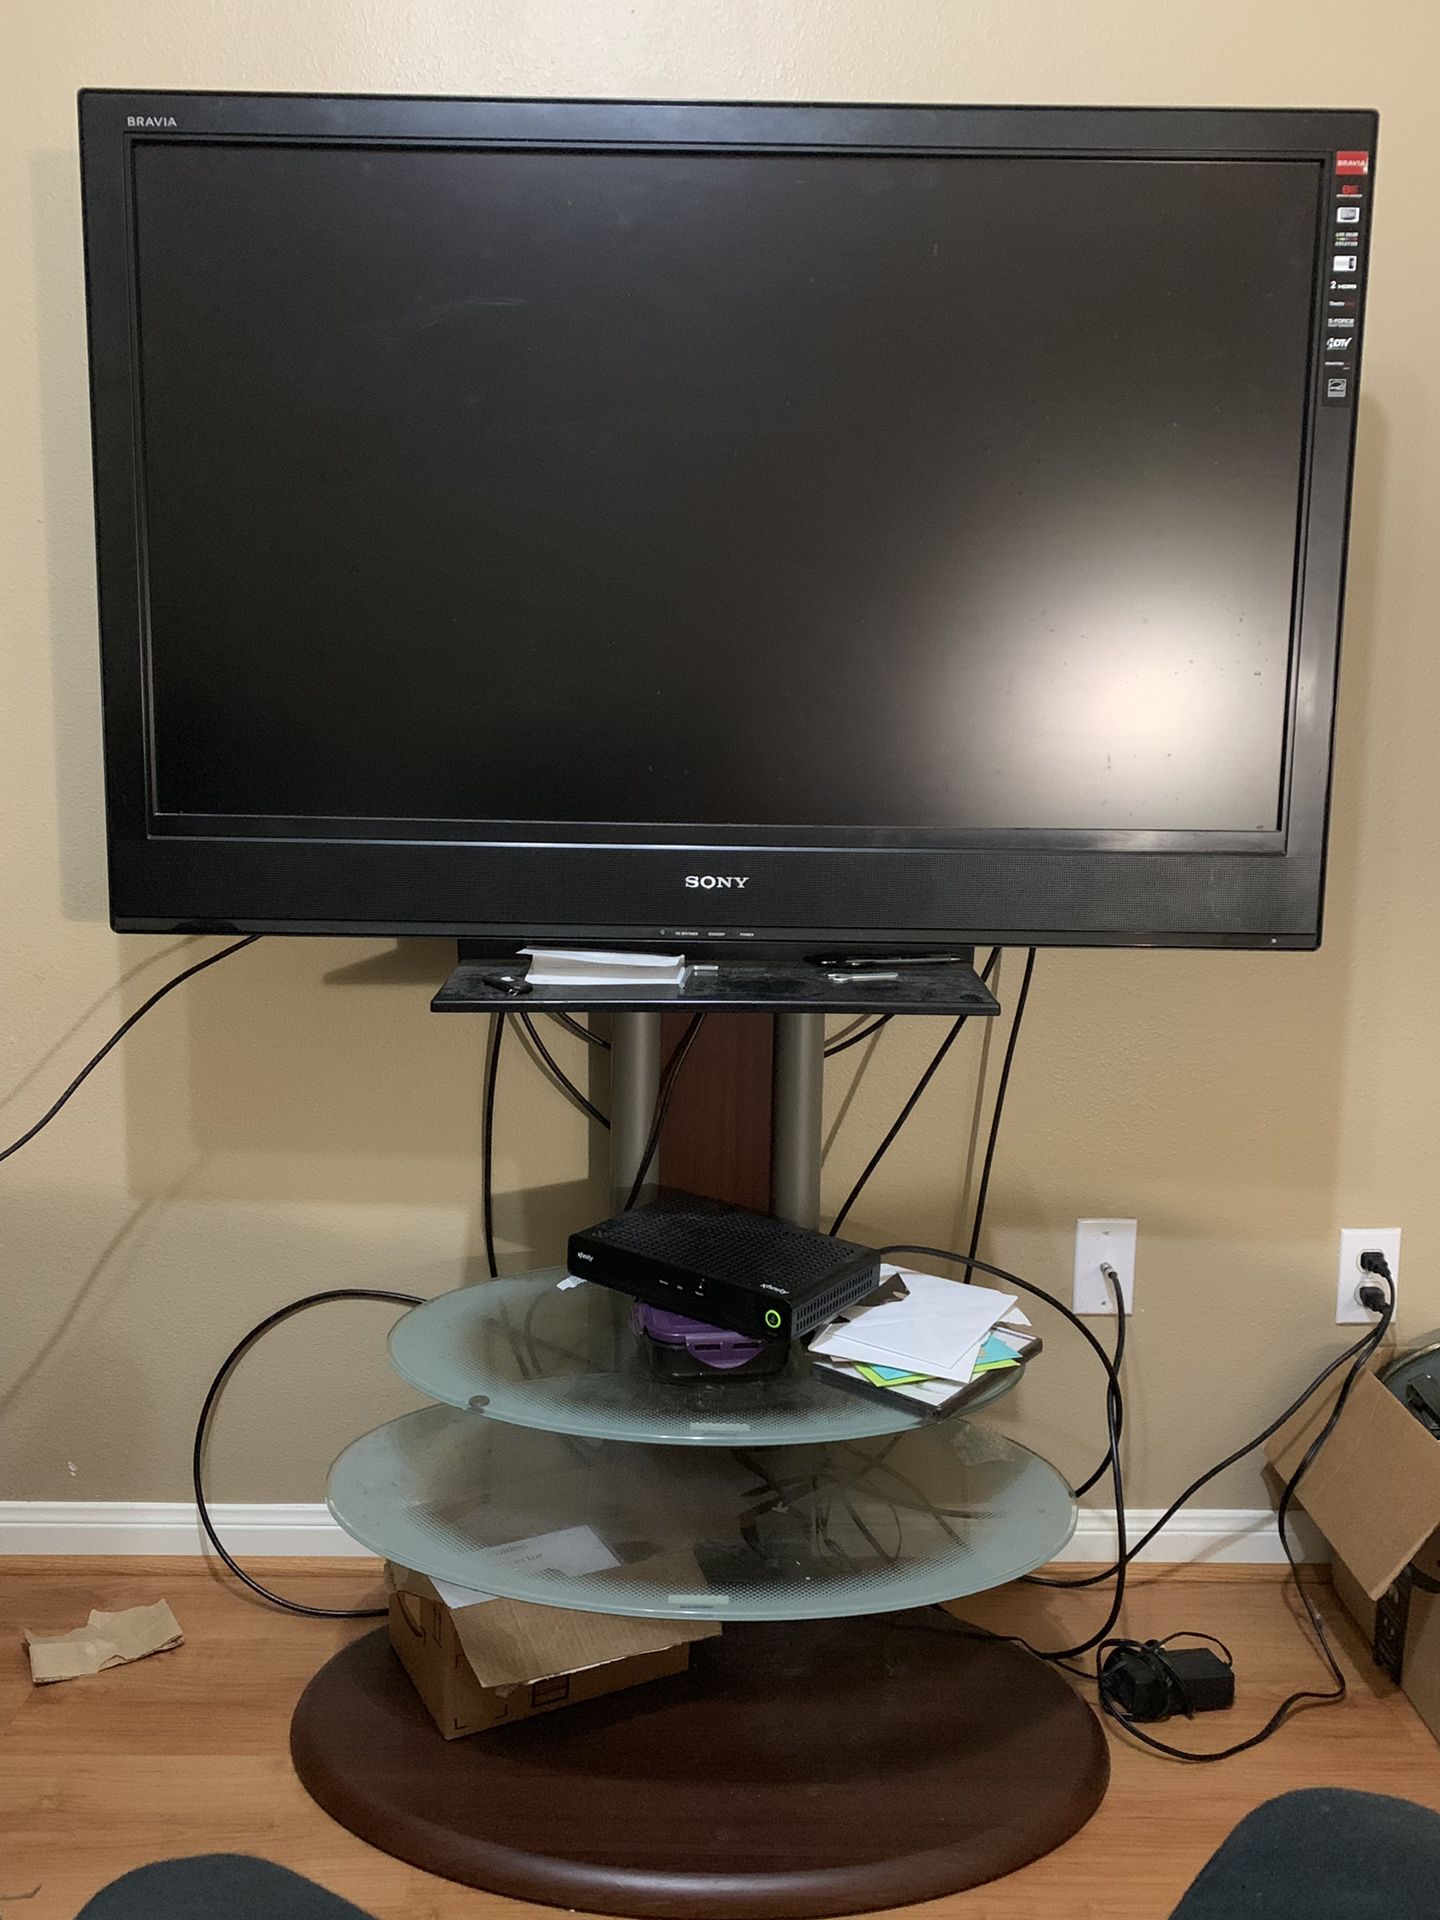 Sony Bravia 46 inch LCD tv with stand